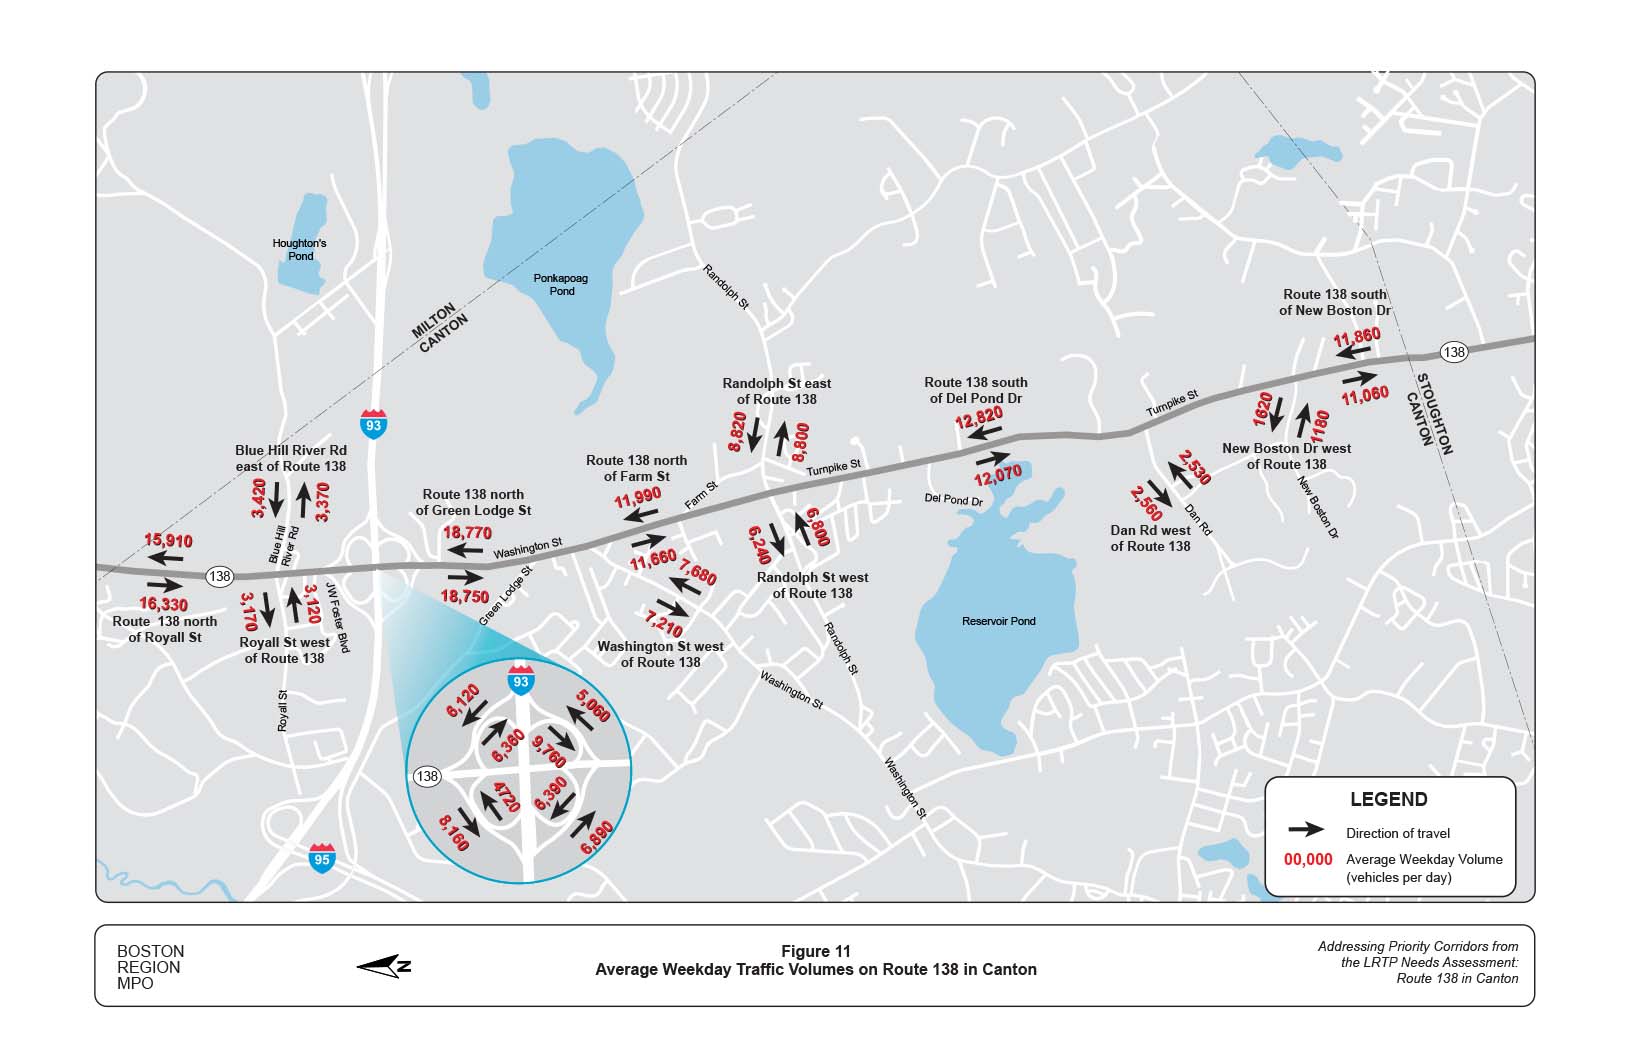 Figure 11 is a map of the study area showing average weekday traffic volumes on Route 138.